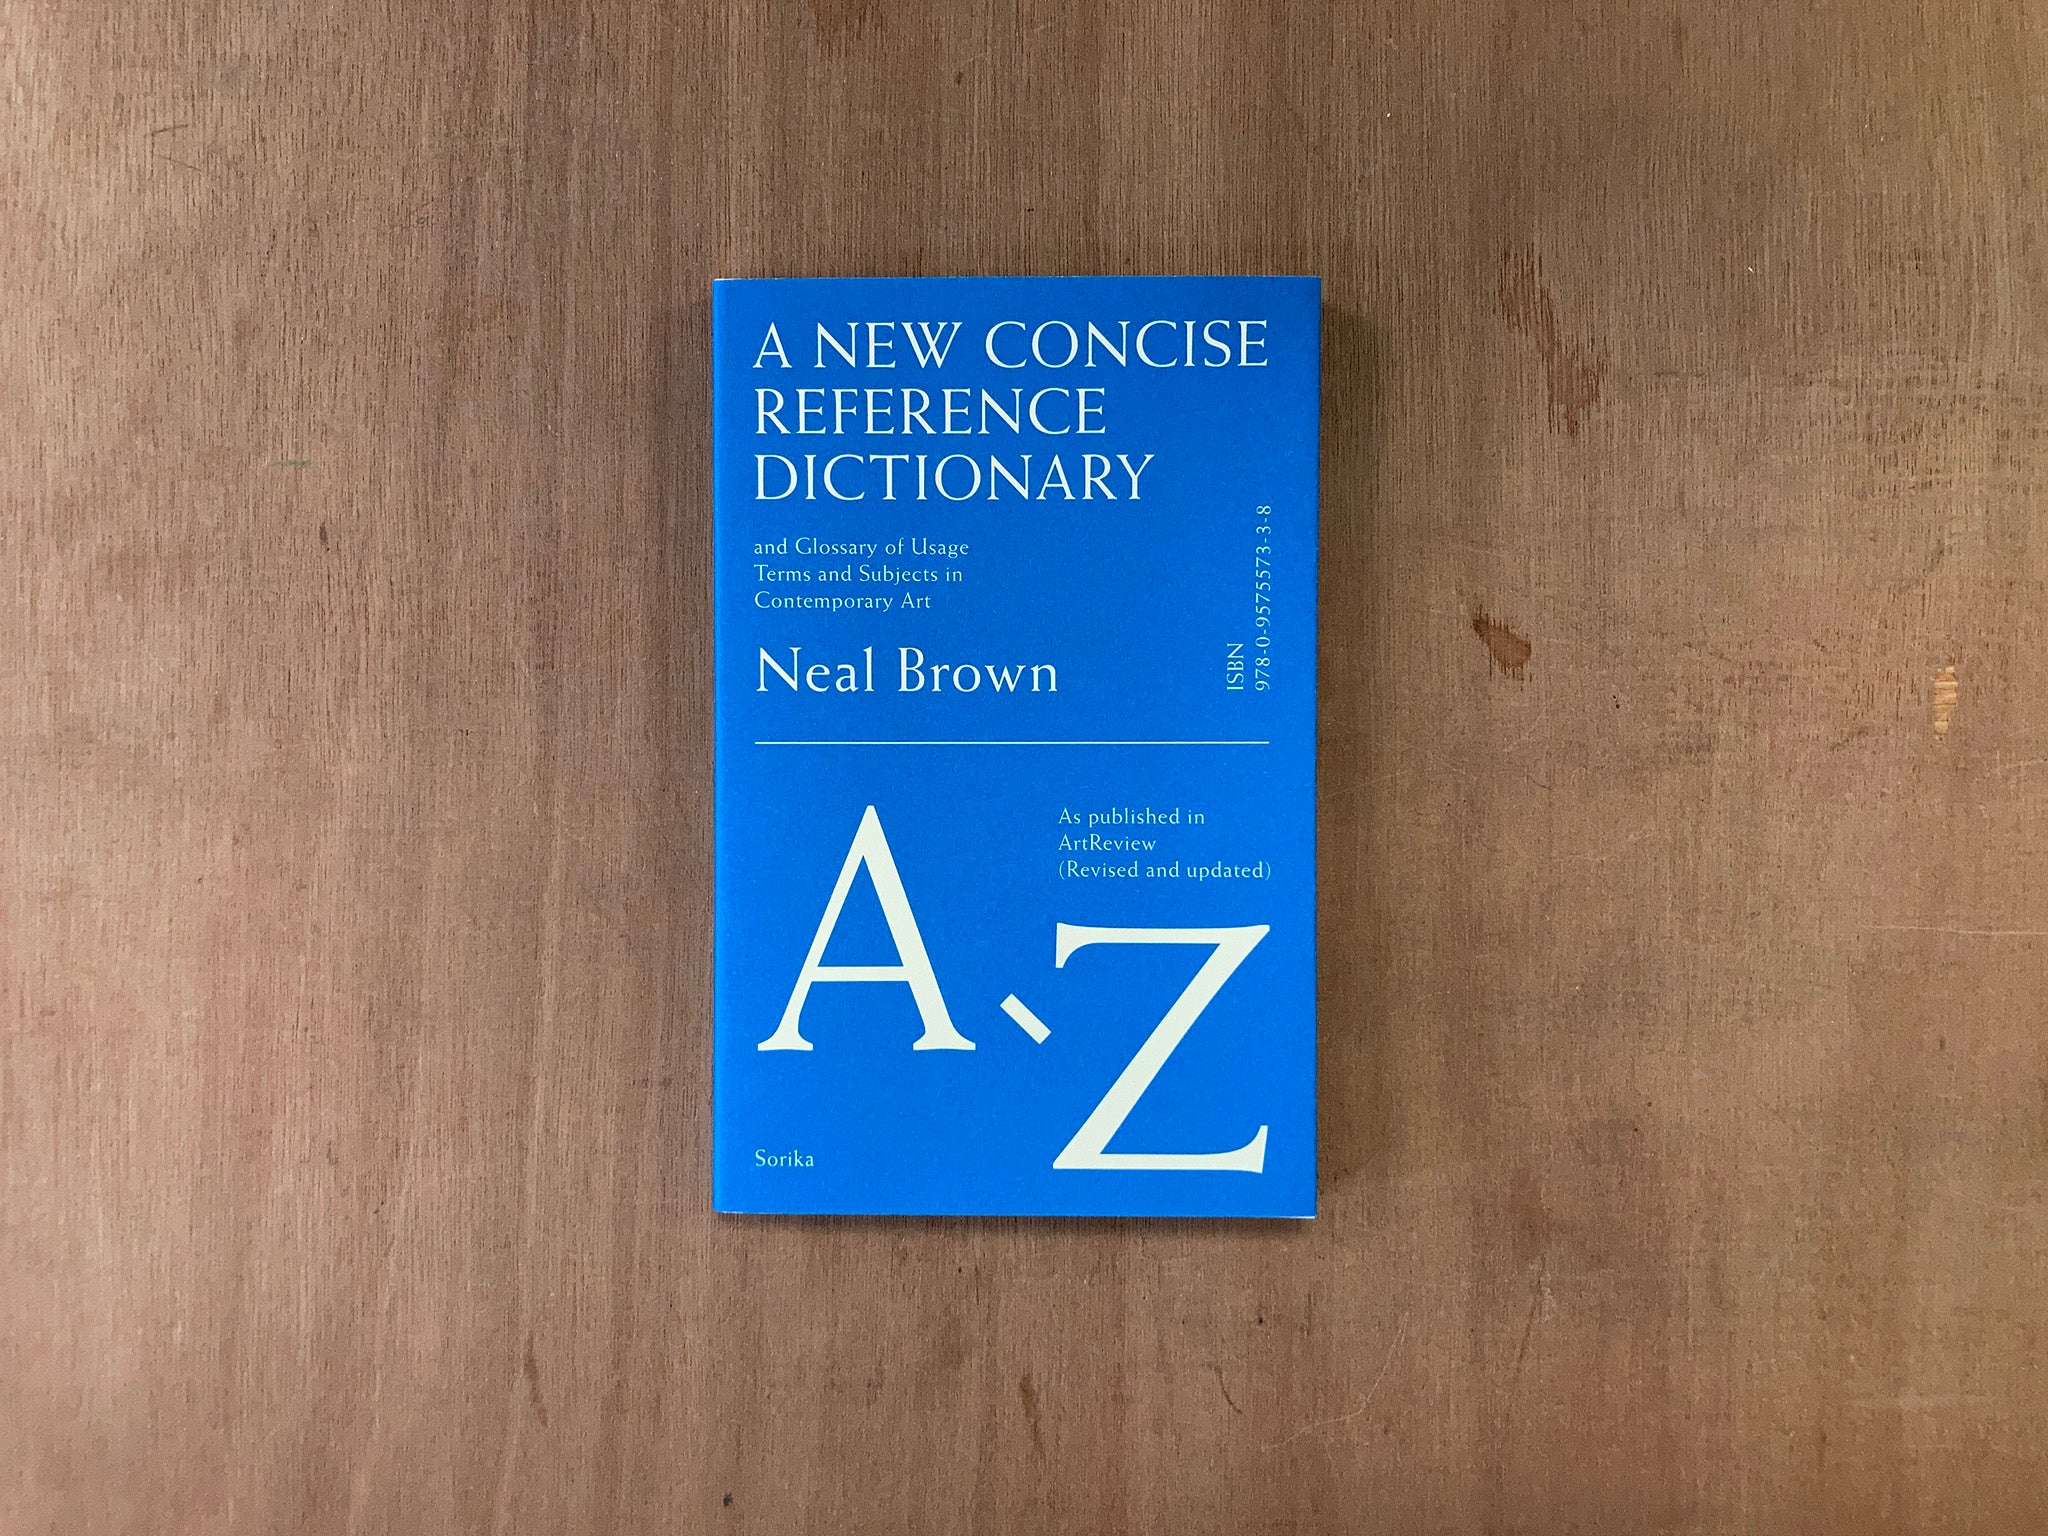 A NEW CONCISE REFERENCE DICTIONARY OF ART by Neal Brown